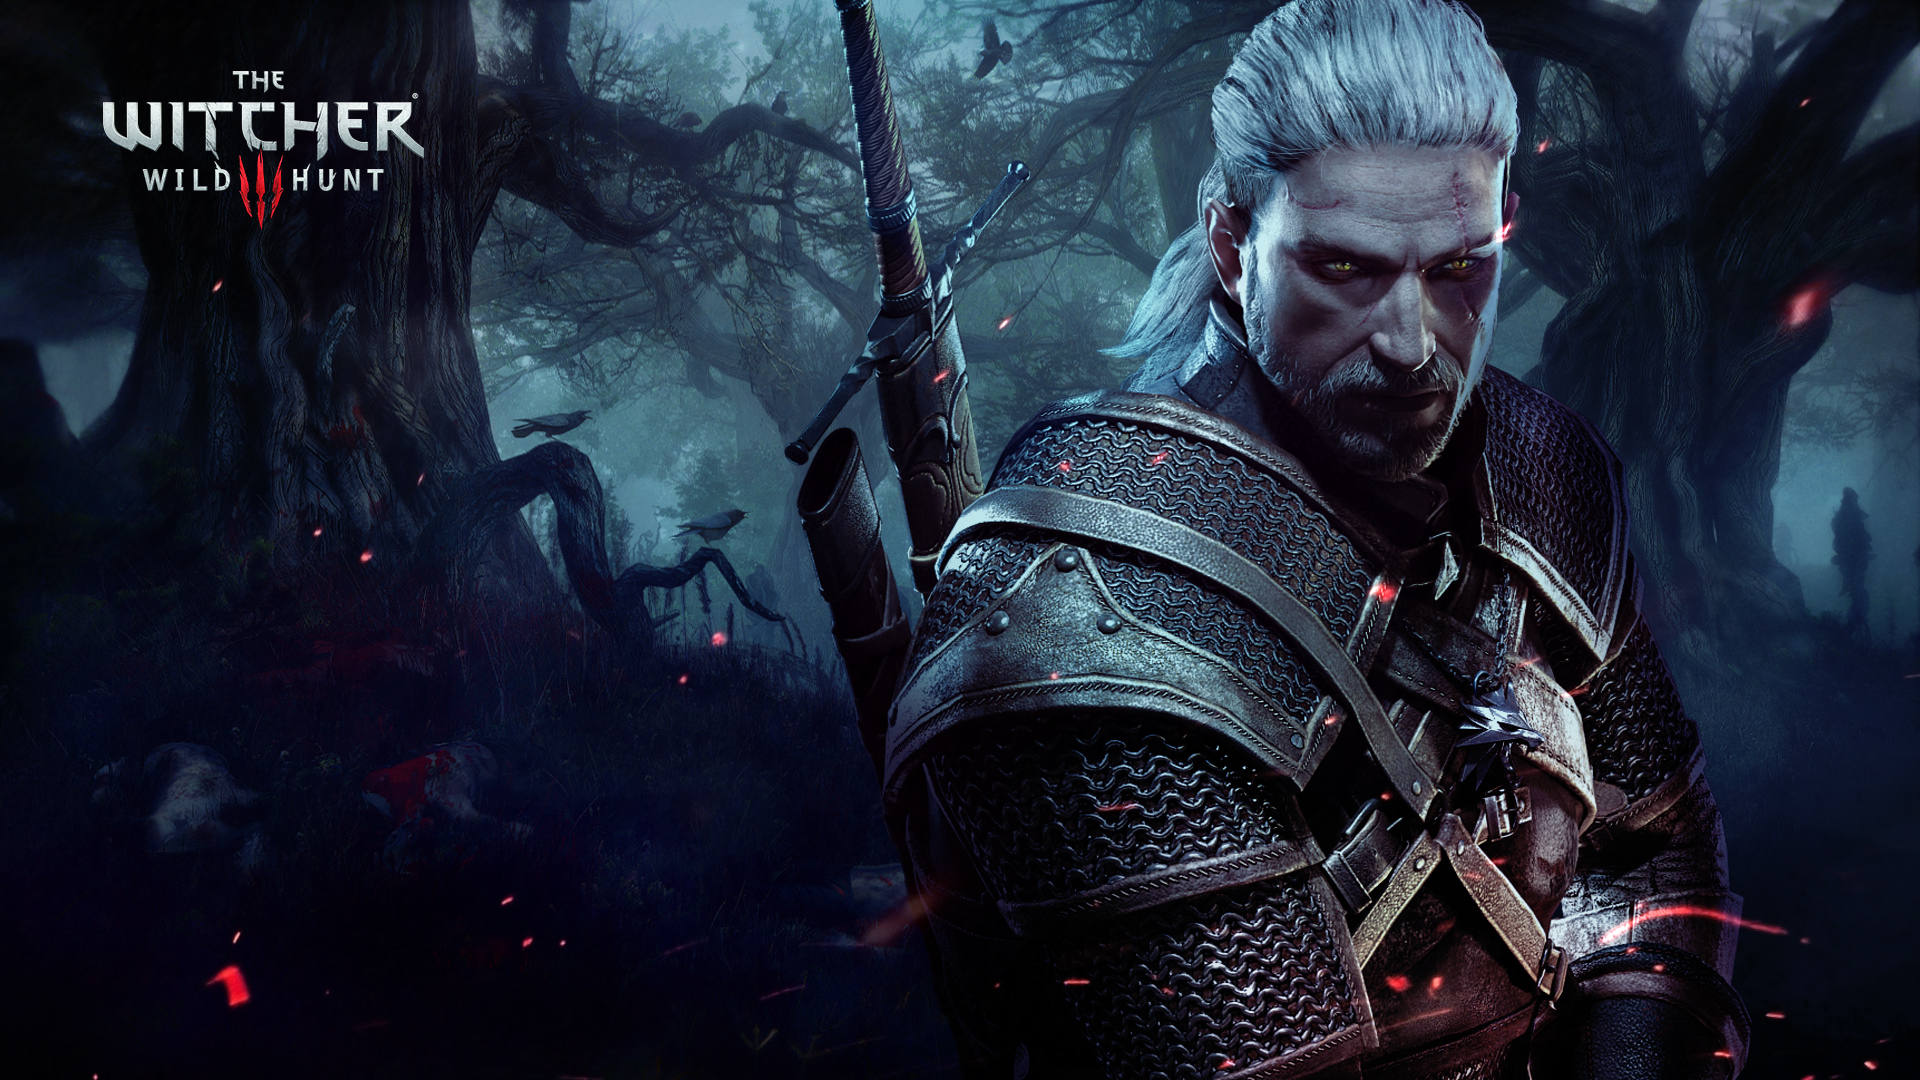 Witcher 3 Iphone wallpaper   1339988 1920x1080